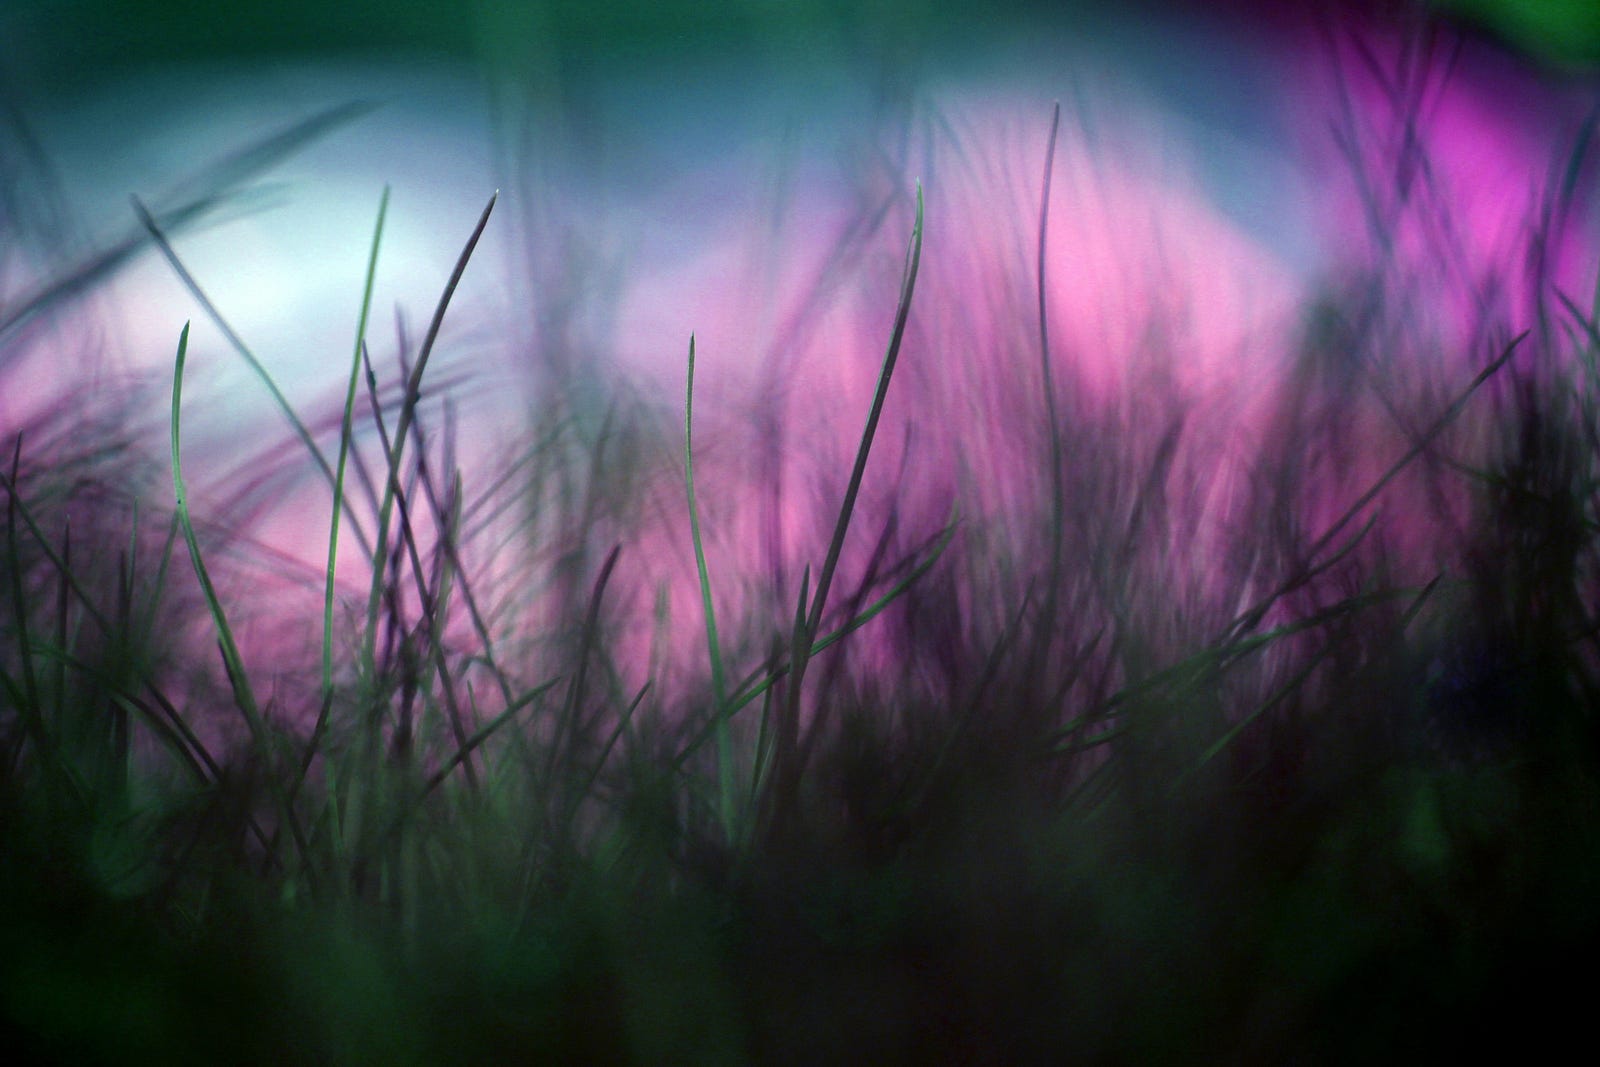 Grass in the foreground, with pink and blue sky in the background.